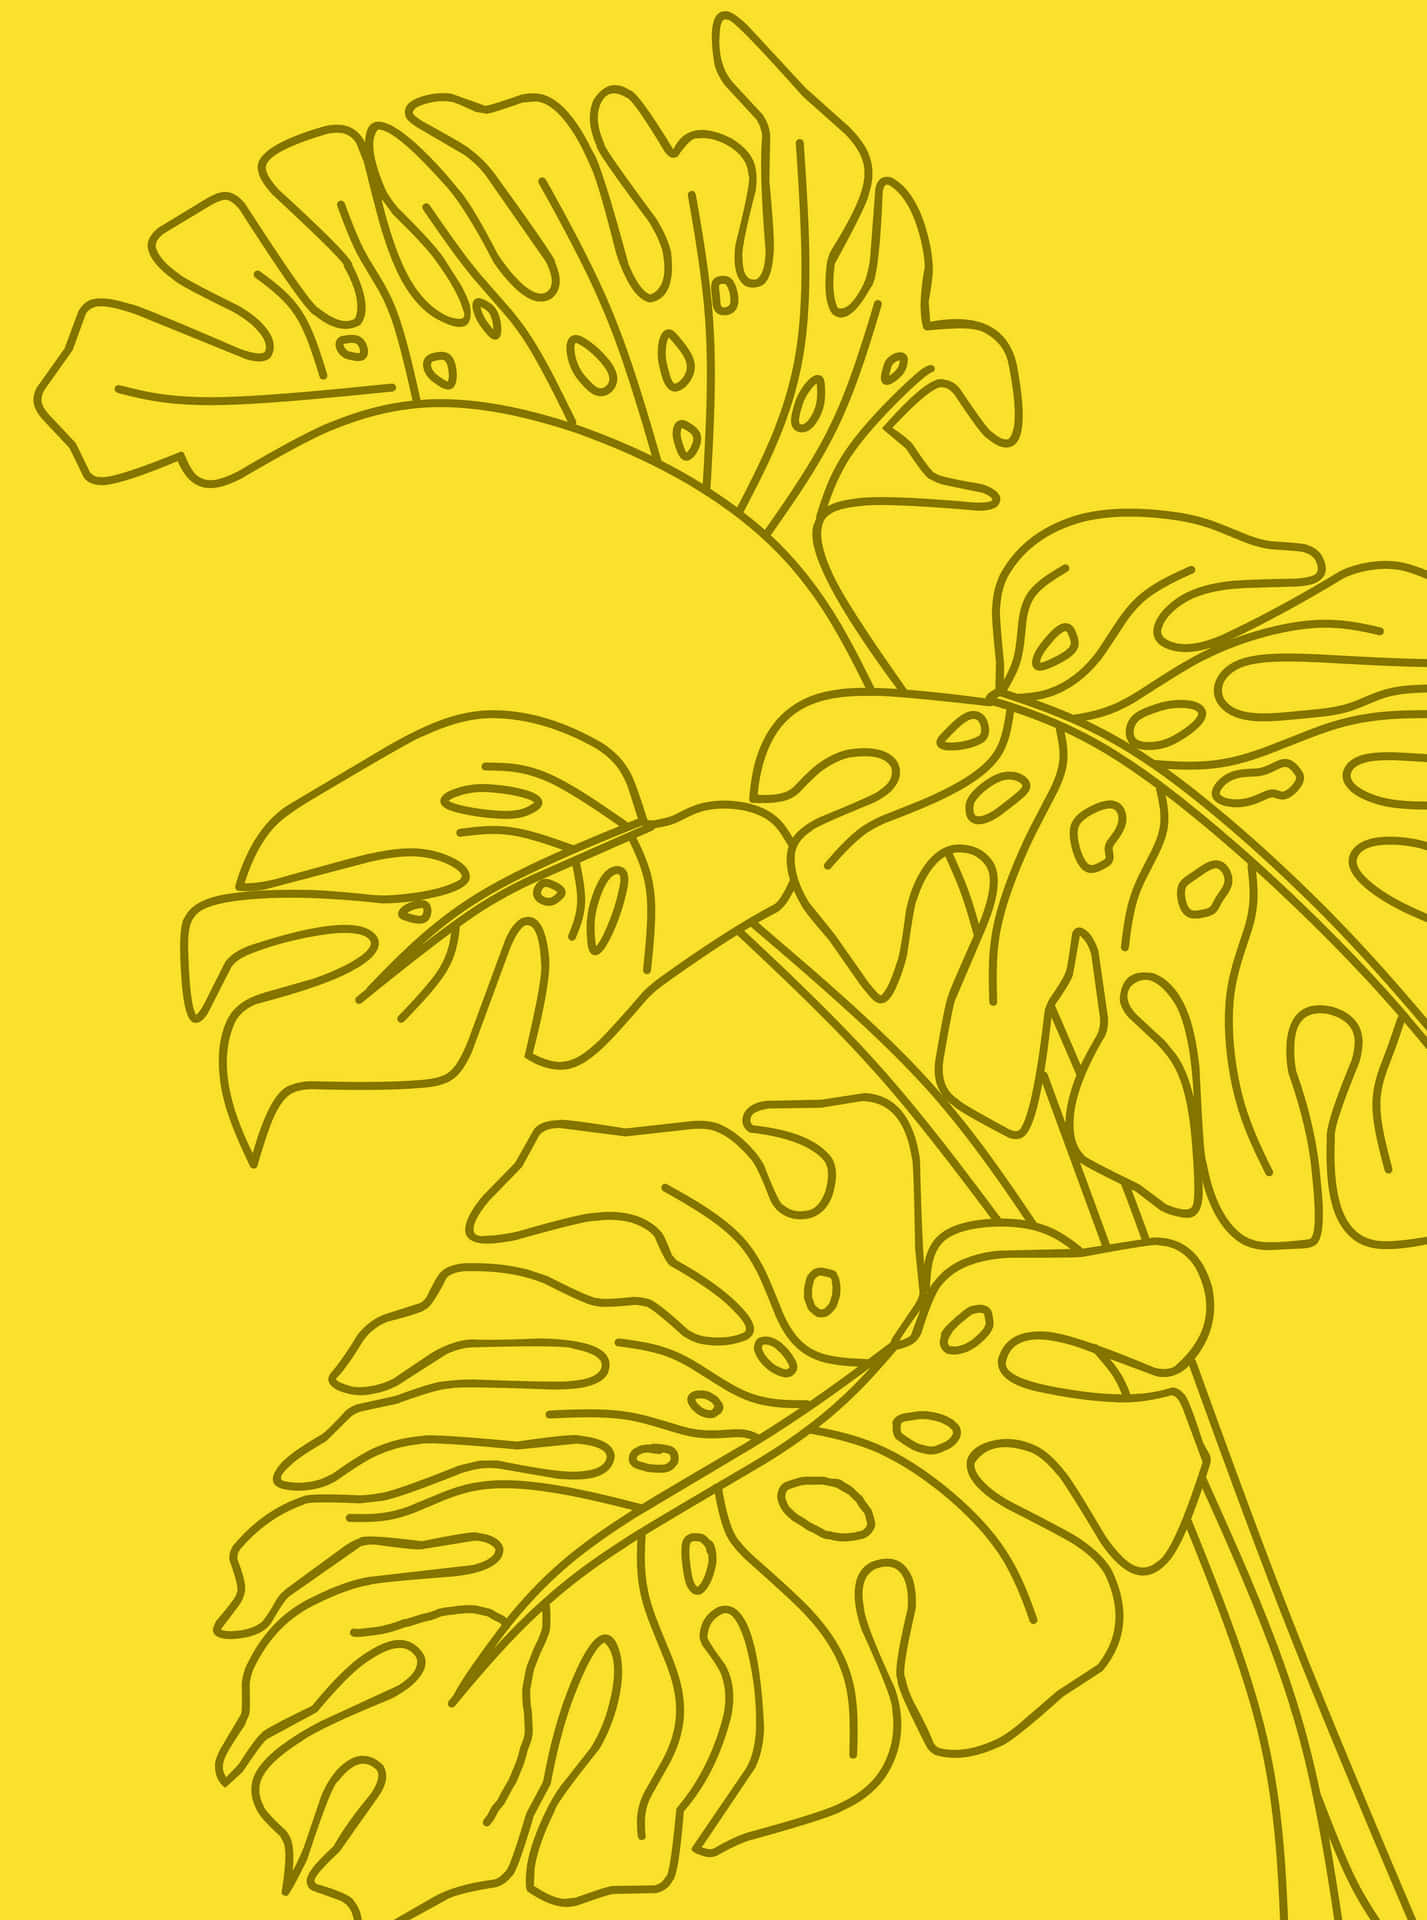 A Line Drawing Of A Tropical Plant On A Yellow Background